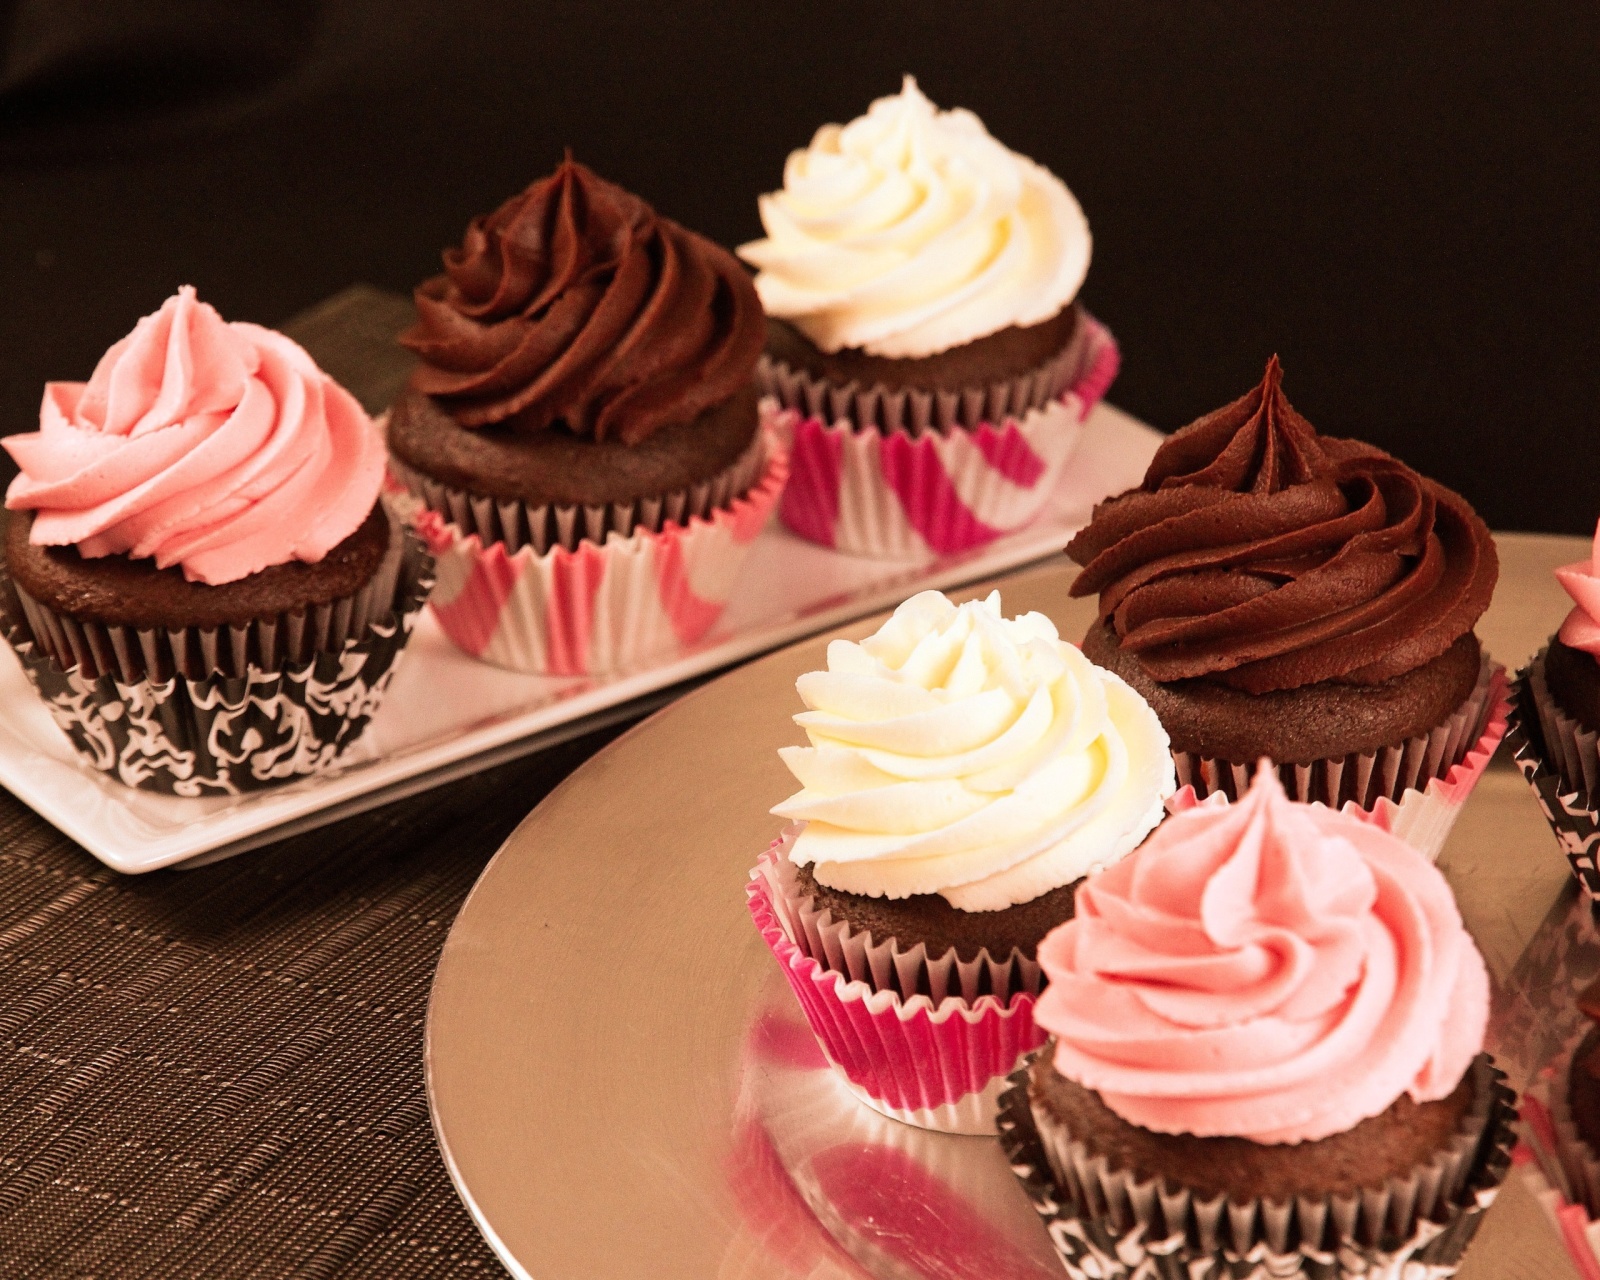 Cupcakes with Creme wallpaper 1600x1280